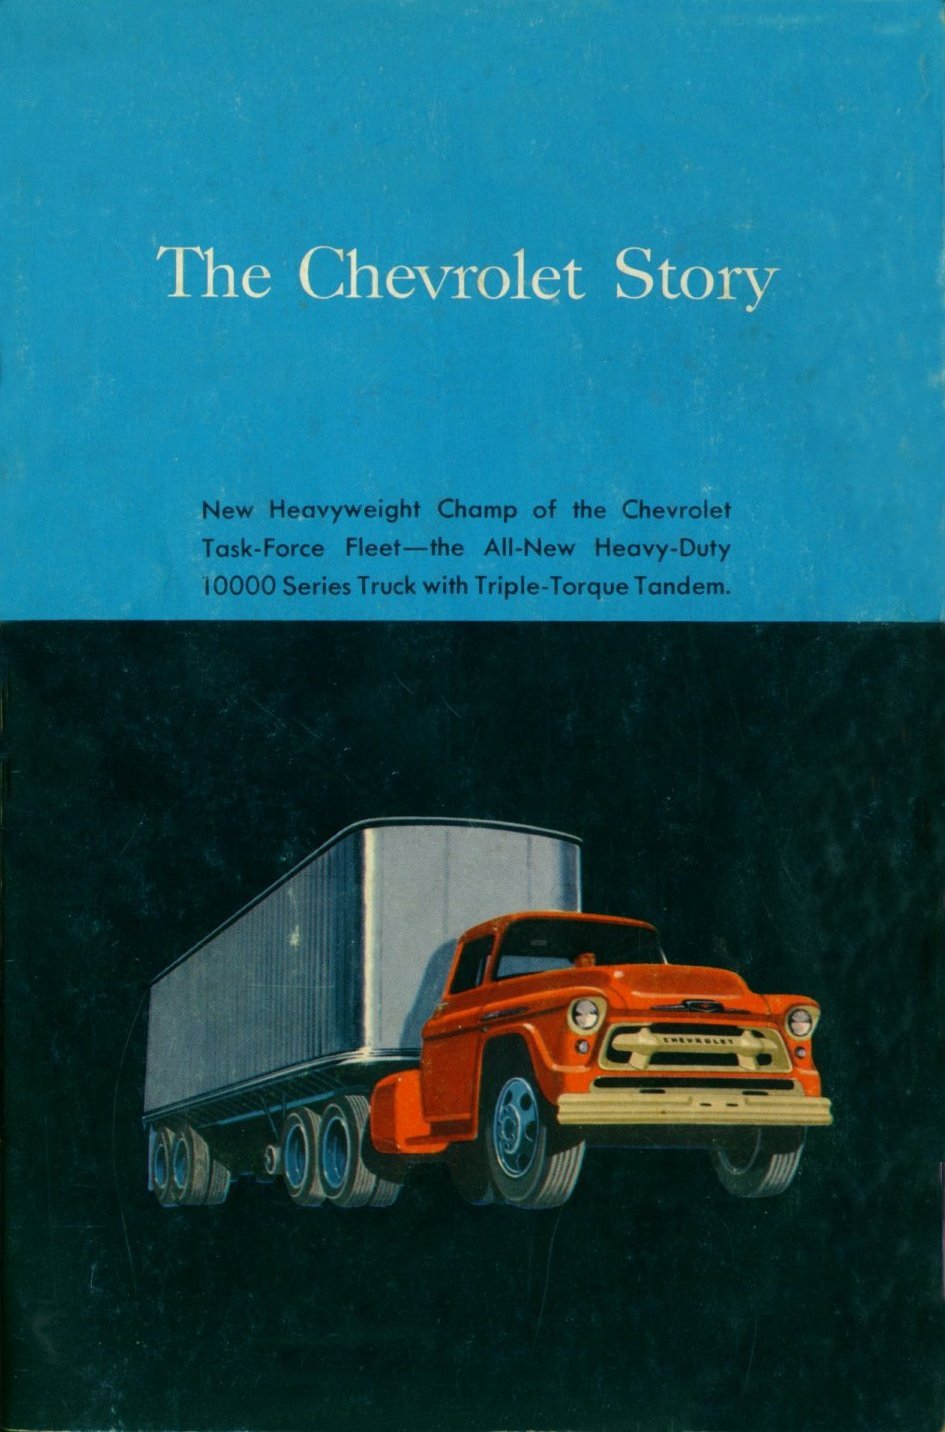 The Chevrolet Story - Published 1956 Page 23